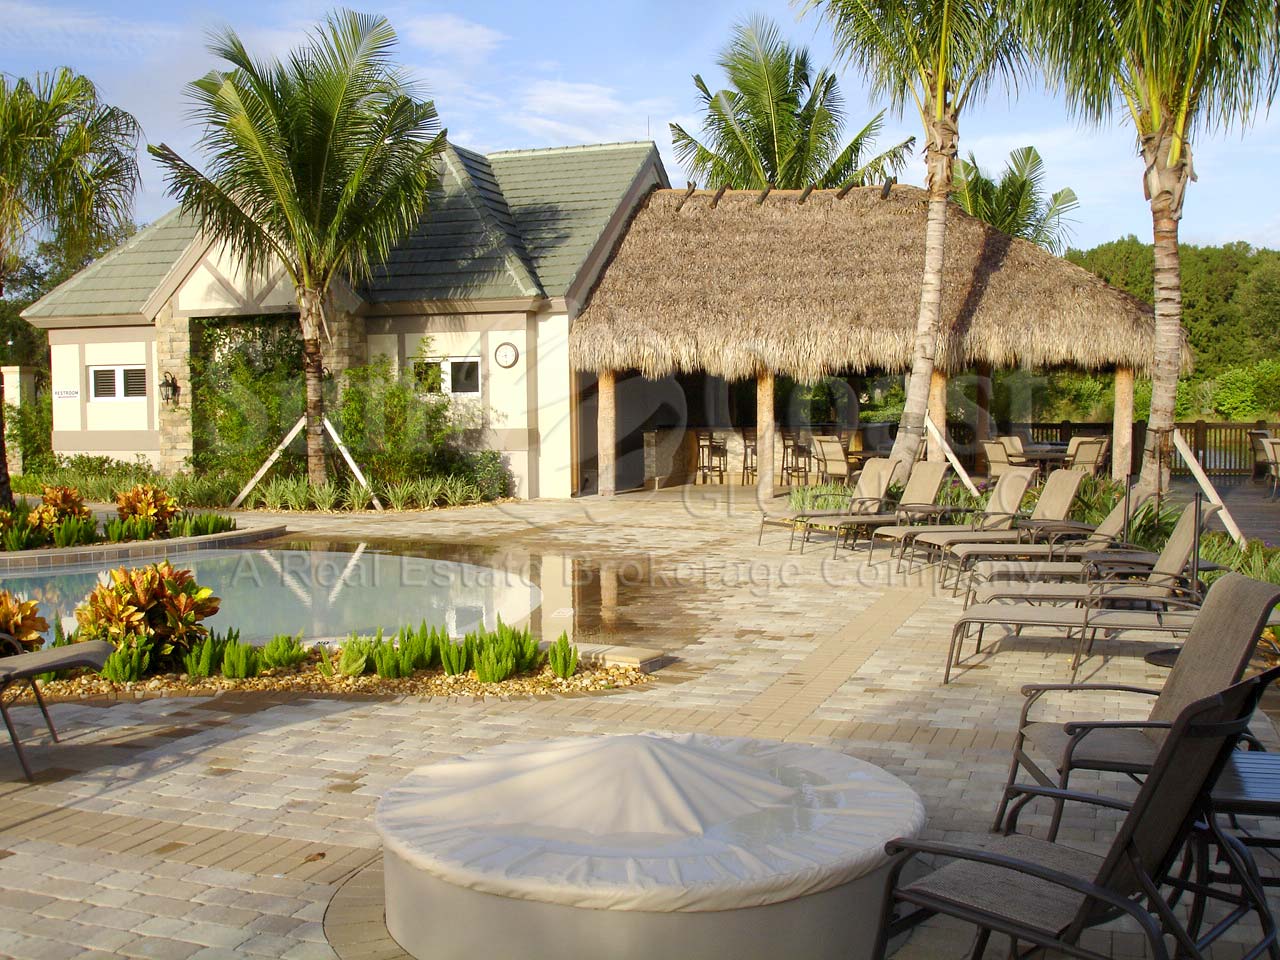 TWIN EAGLES Golf and Country Club pool area with fire pit and tiki hut